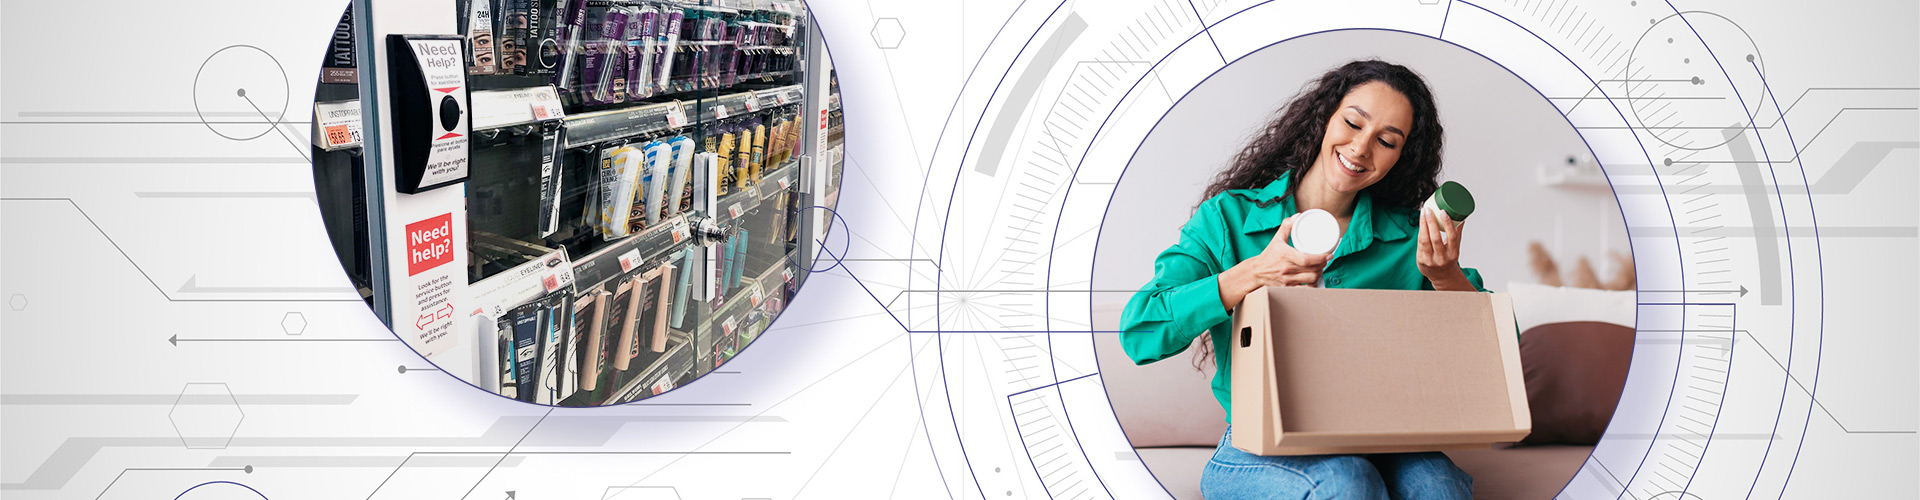 Blog banner featuring lines connecting a circular image of locked up products in store to a circular image of a woman opening up a package that was delivered